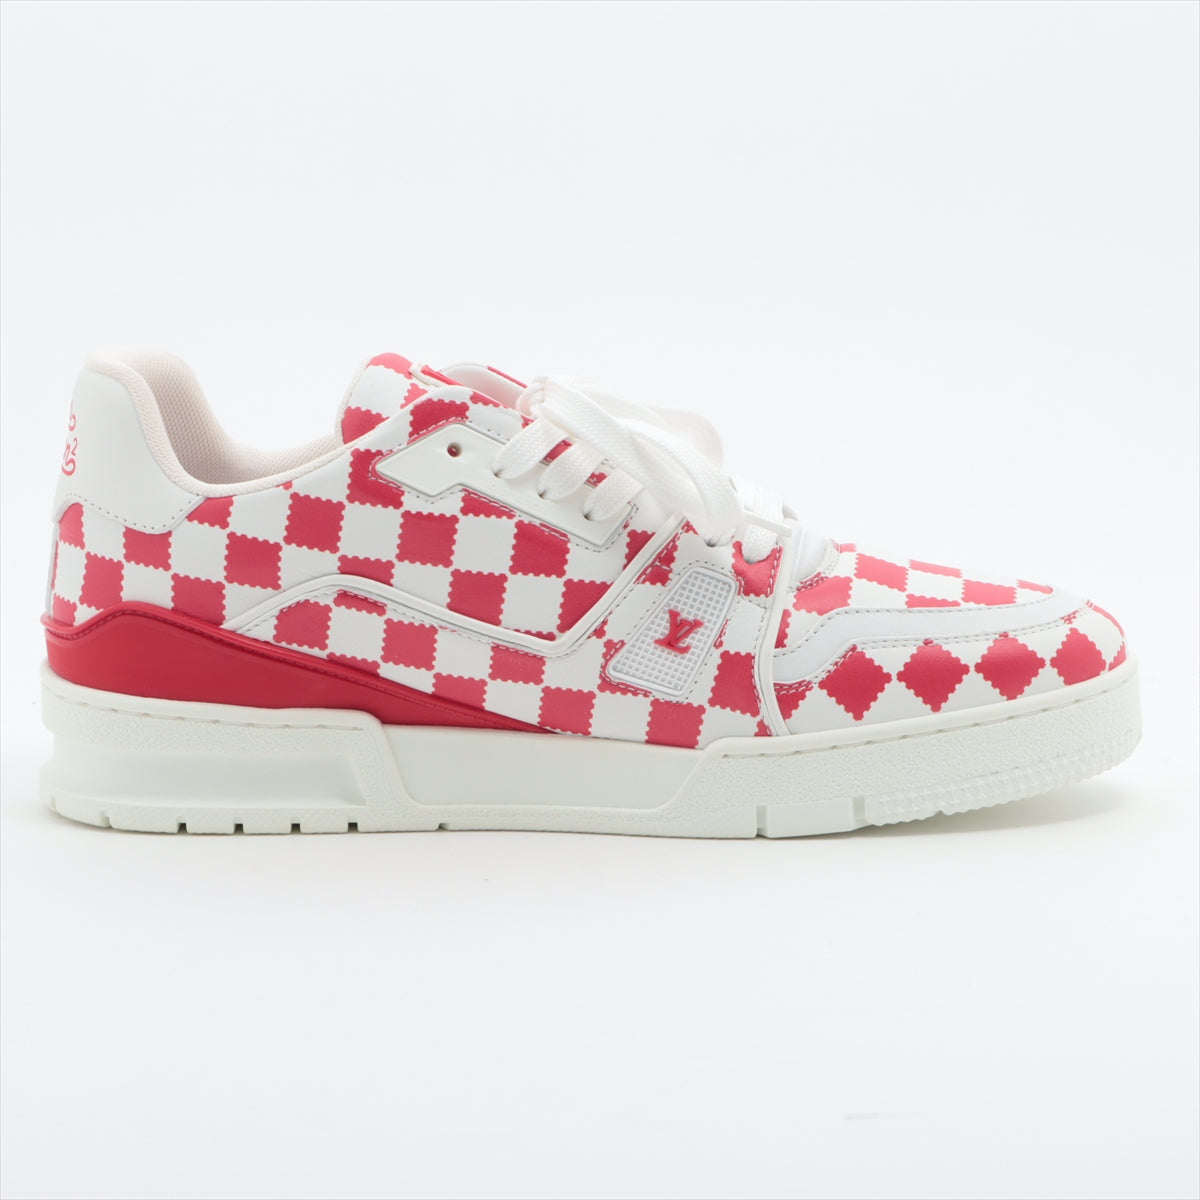 Louis Vuitton x NIGO LV Trainer Line 21 years Leather Sneakers 6 1/2 Men's Red x white BM0291 checkers Is there a replacement string